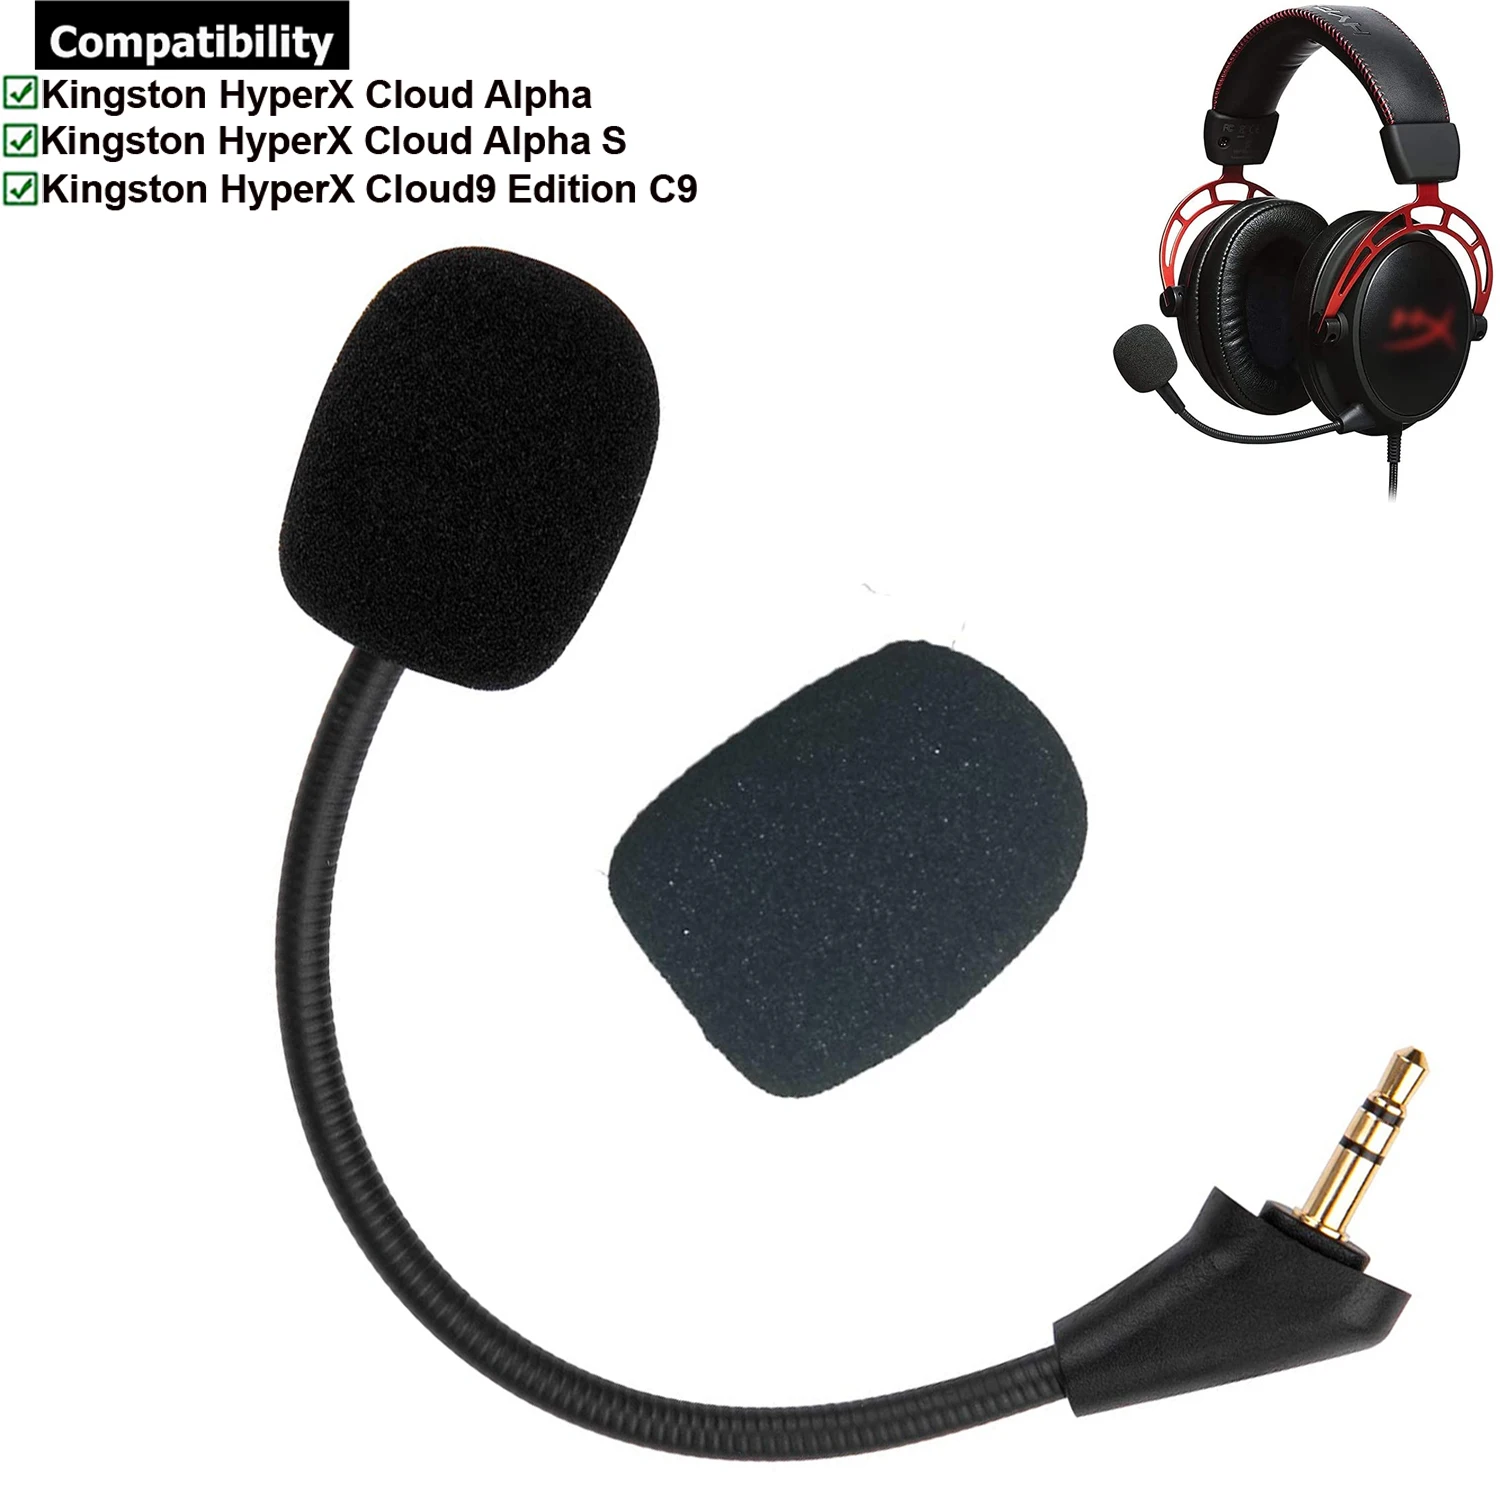 

Replacement Game Mic Aux 3.5mm Microphone Booms for Kingston HyperX Cloud Alpha S Cloud9 Edition C9 Gaming Headsets Headphones